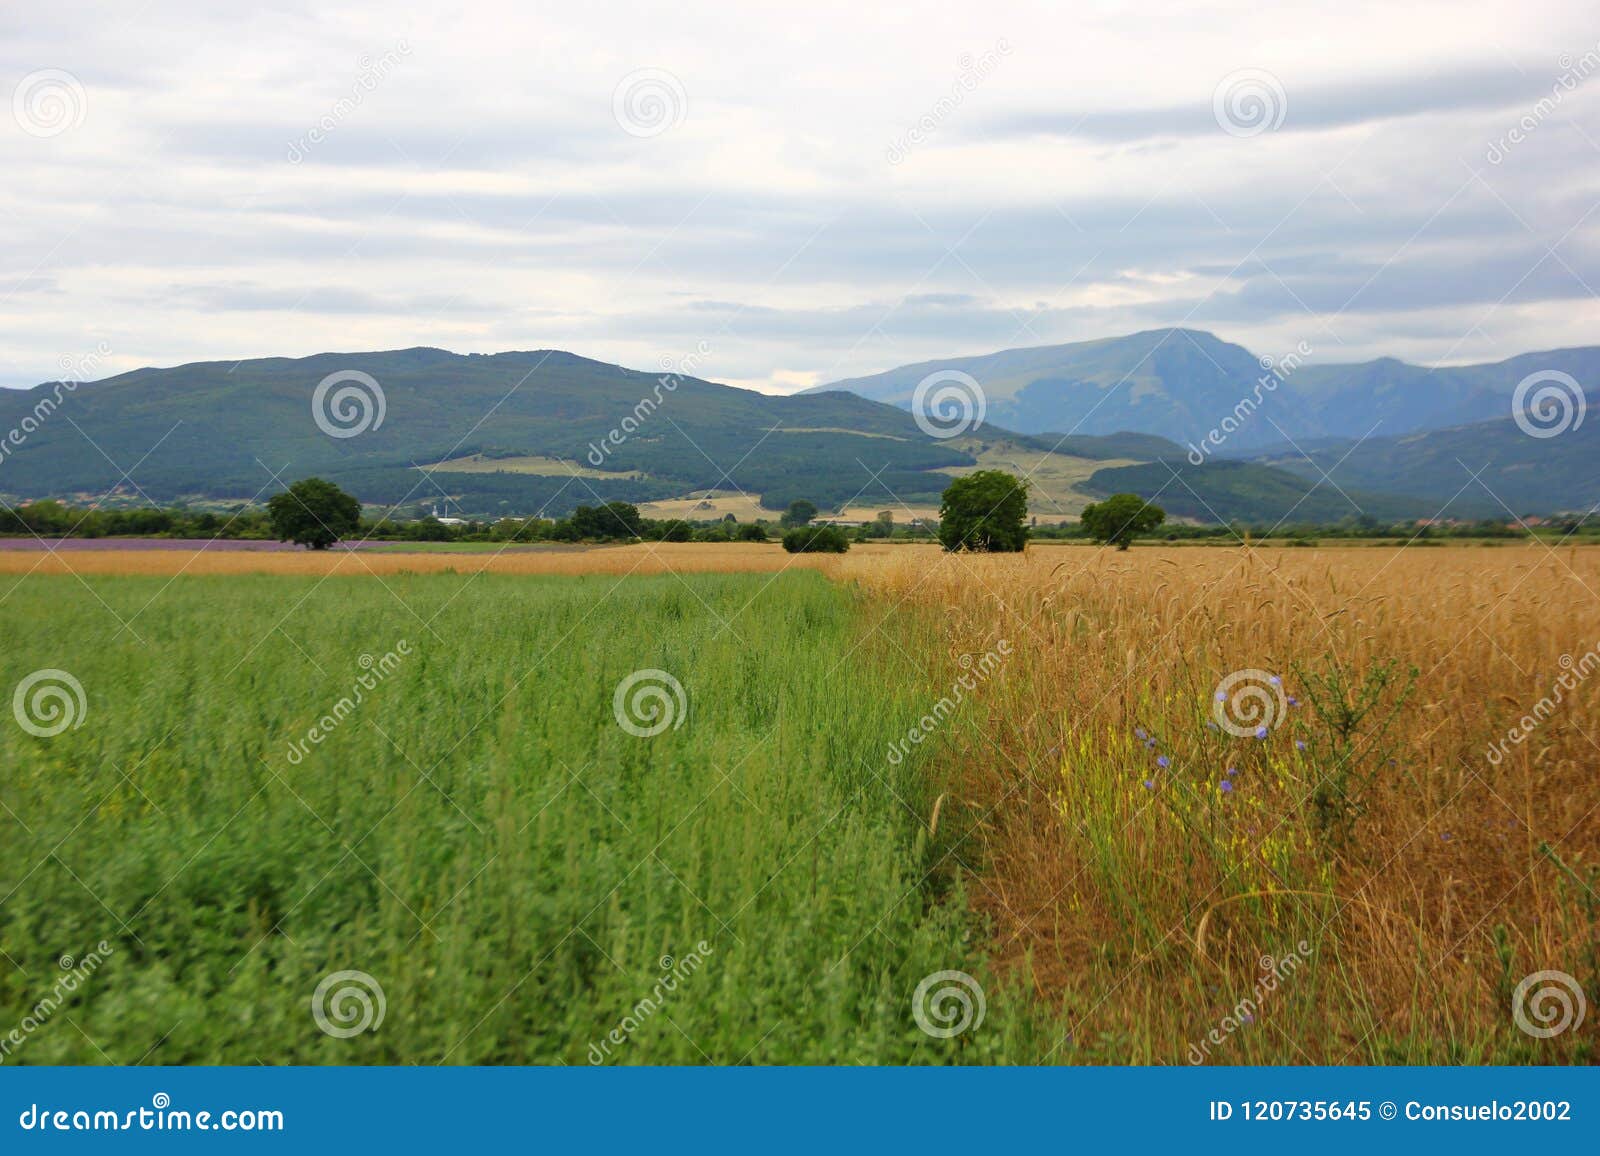 fields with different plantings